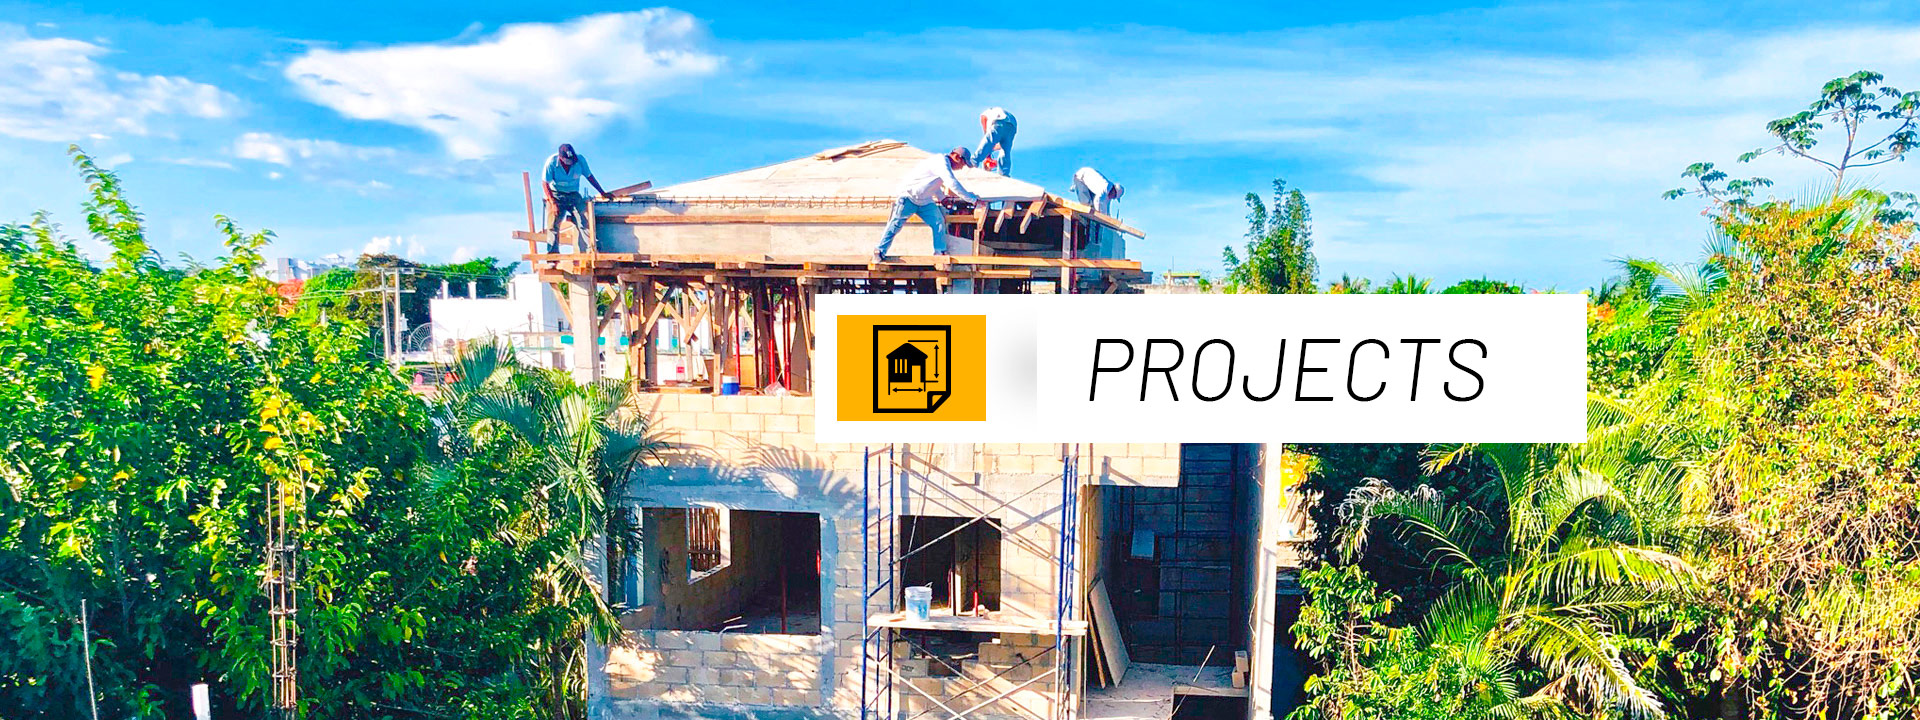 projects grupo hch, construction image in cozumel